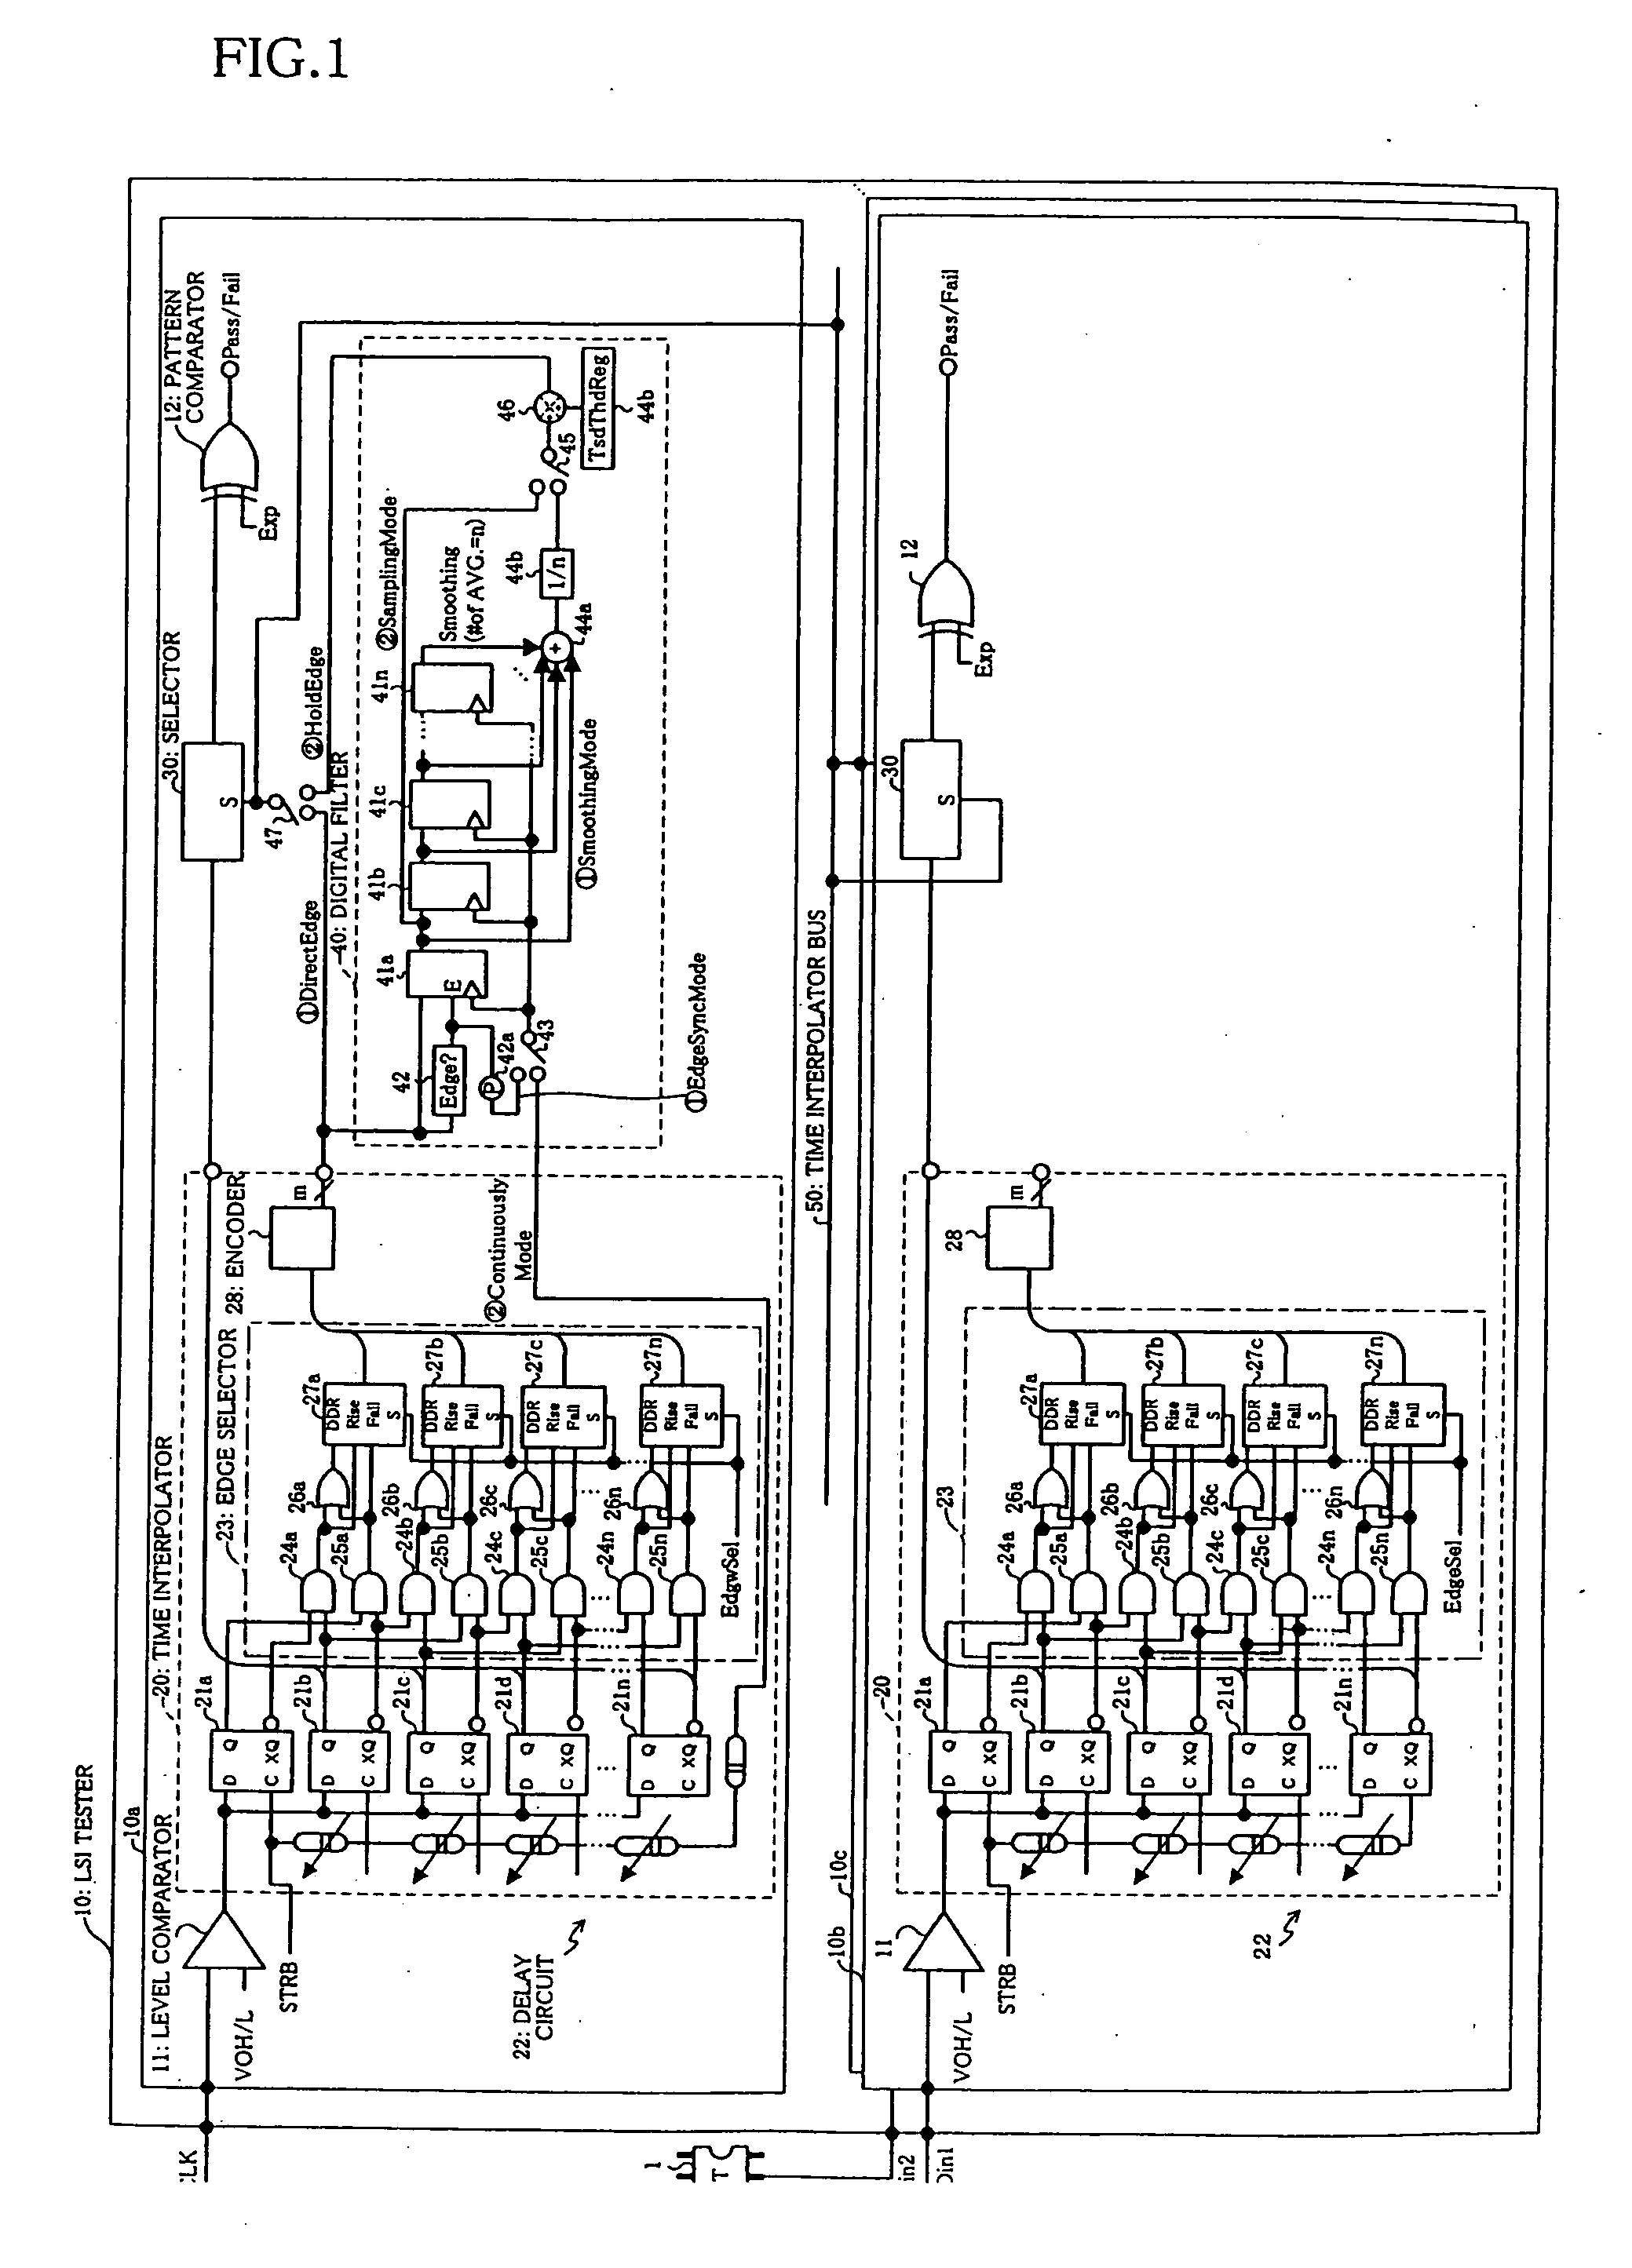 Semiconductor test device